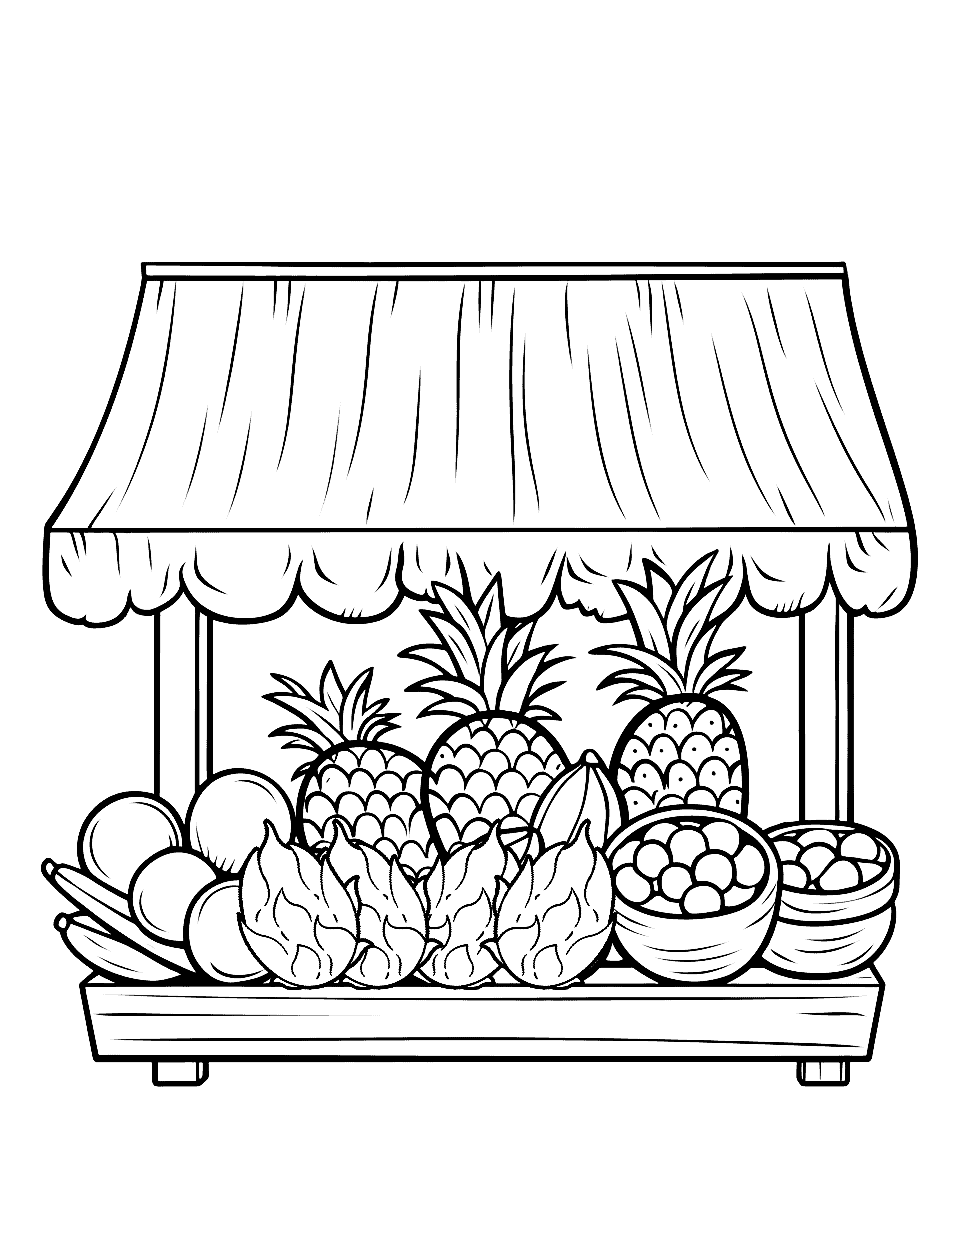 Fruit Market Day Coloring Page - Various fruits displayed in a market setting.